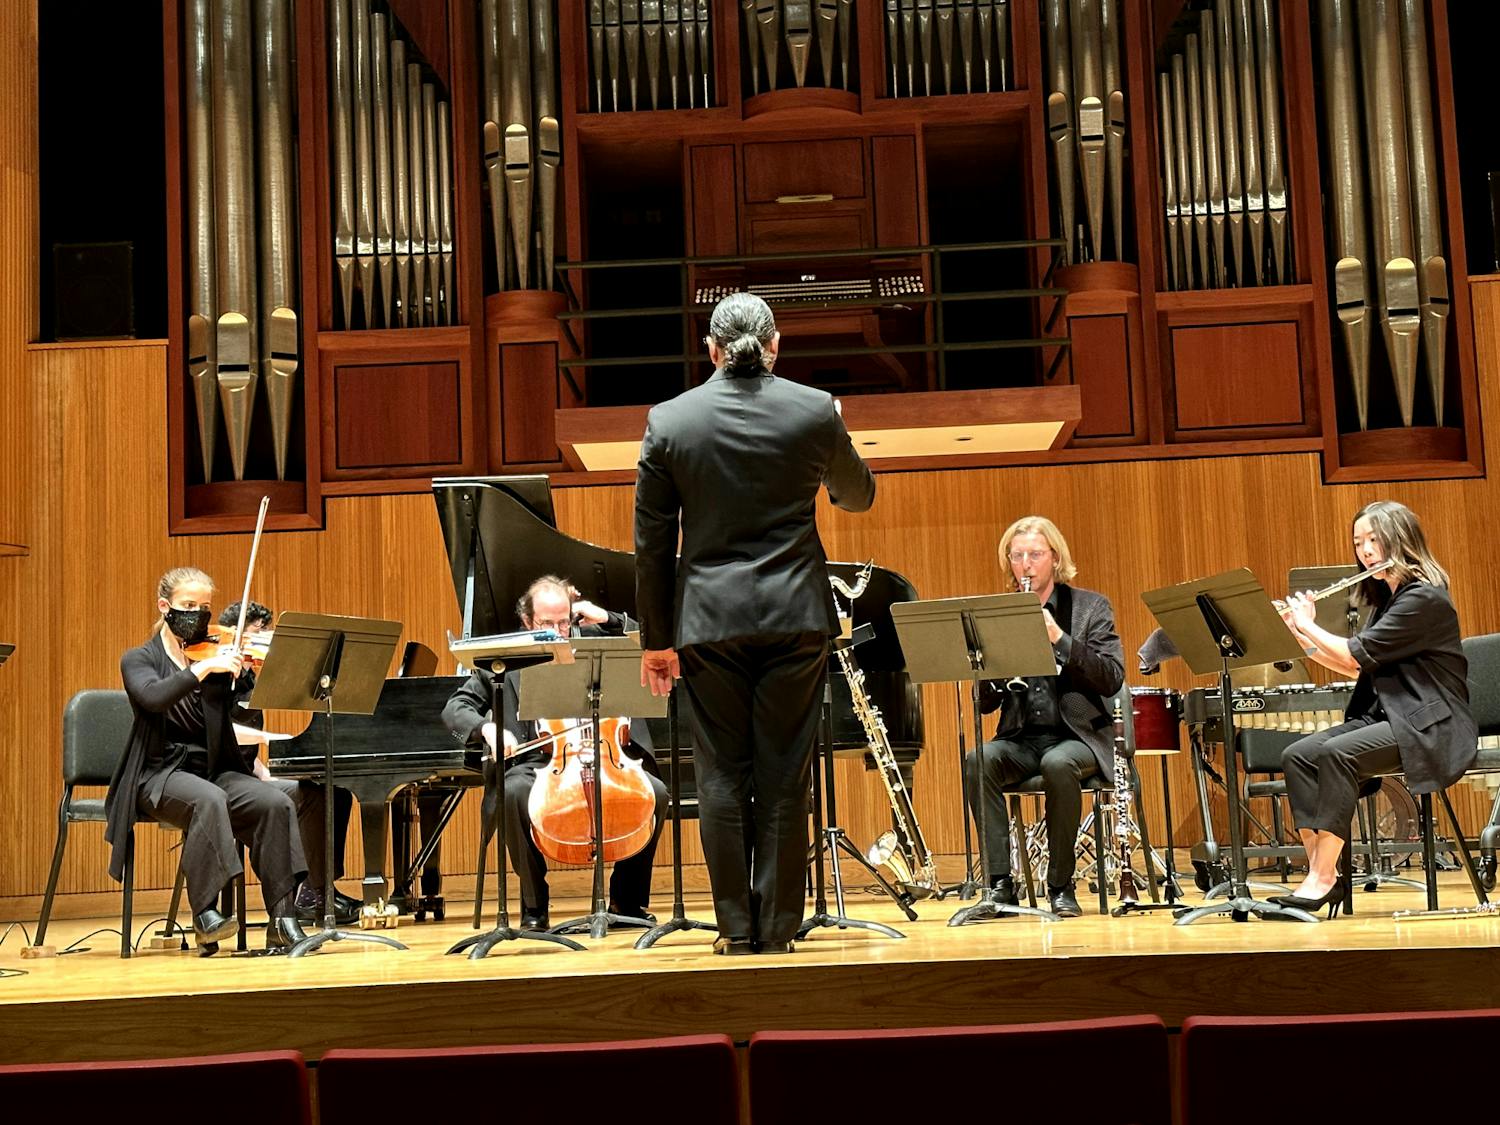 Pan-Americana featured many small groups performing works in honor of Latin American composers.